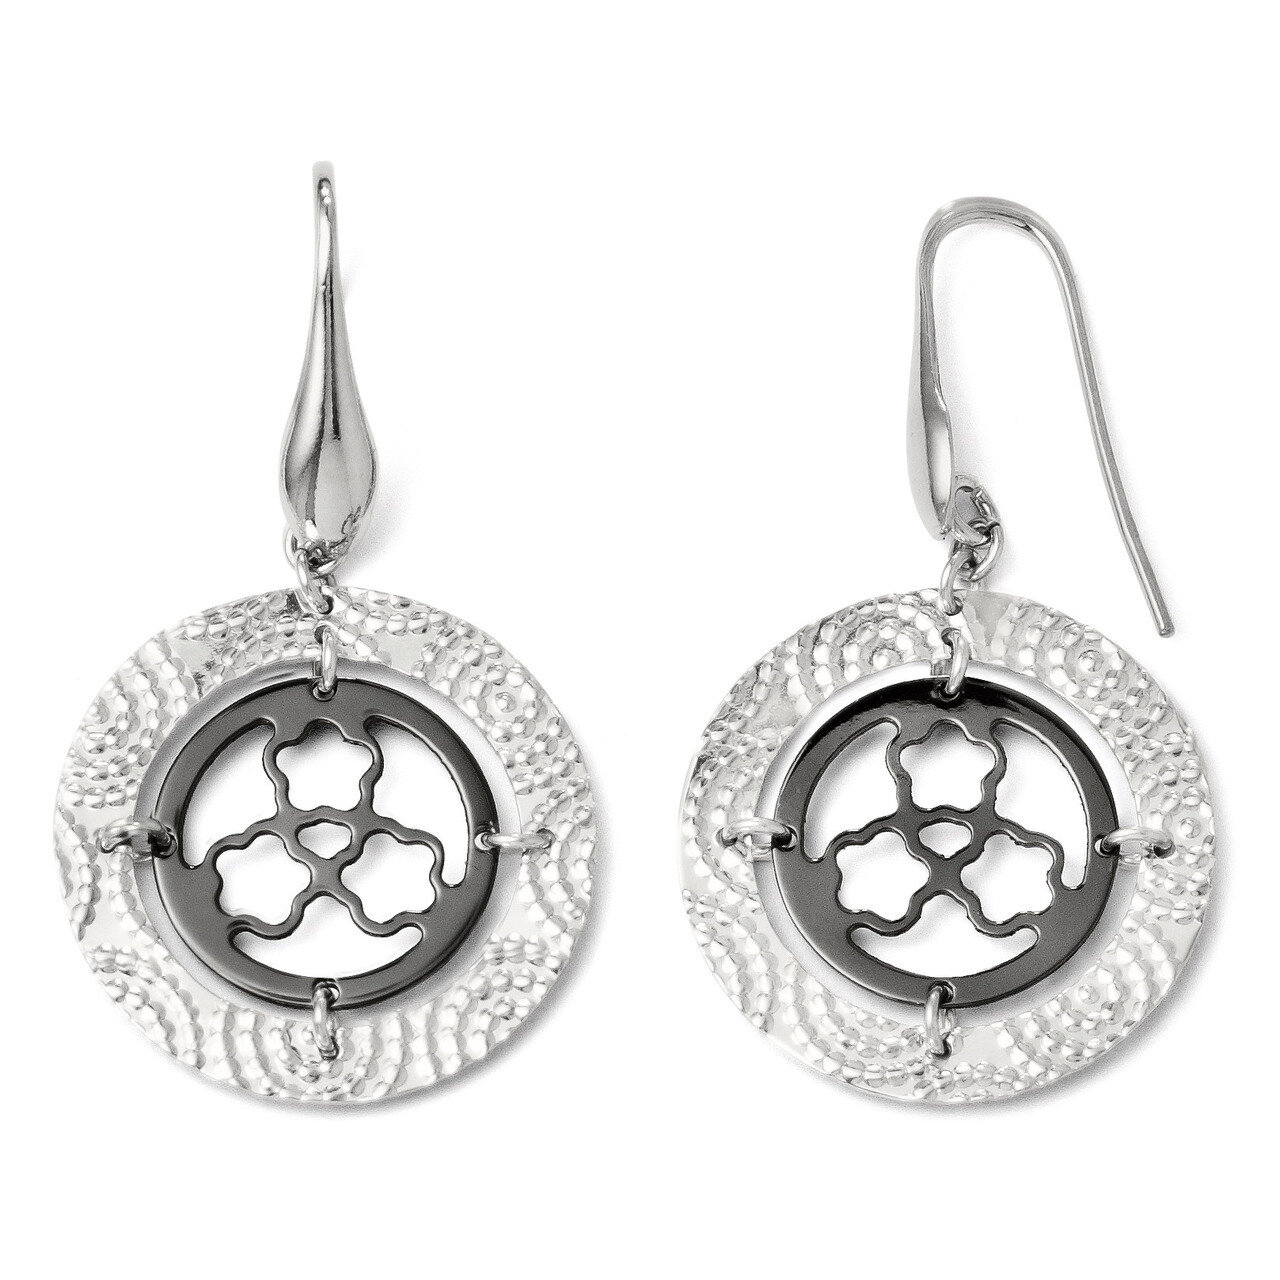 Sterling Silver and Rhodium-plated Diamond-cut Earrings F303